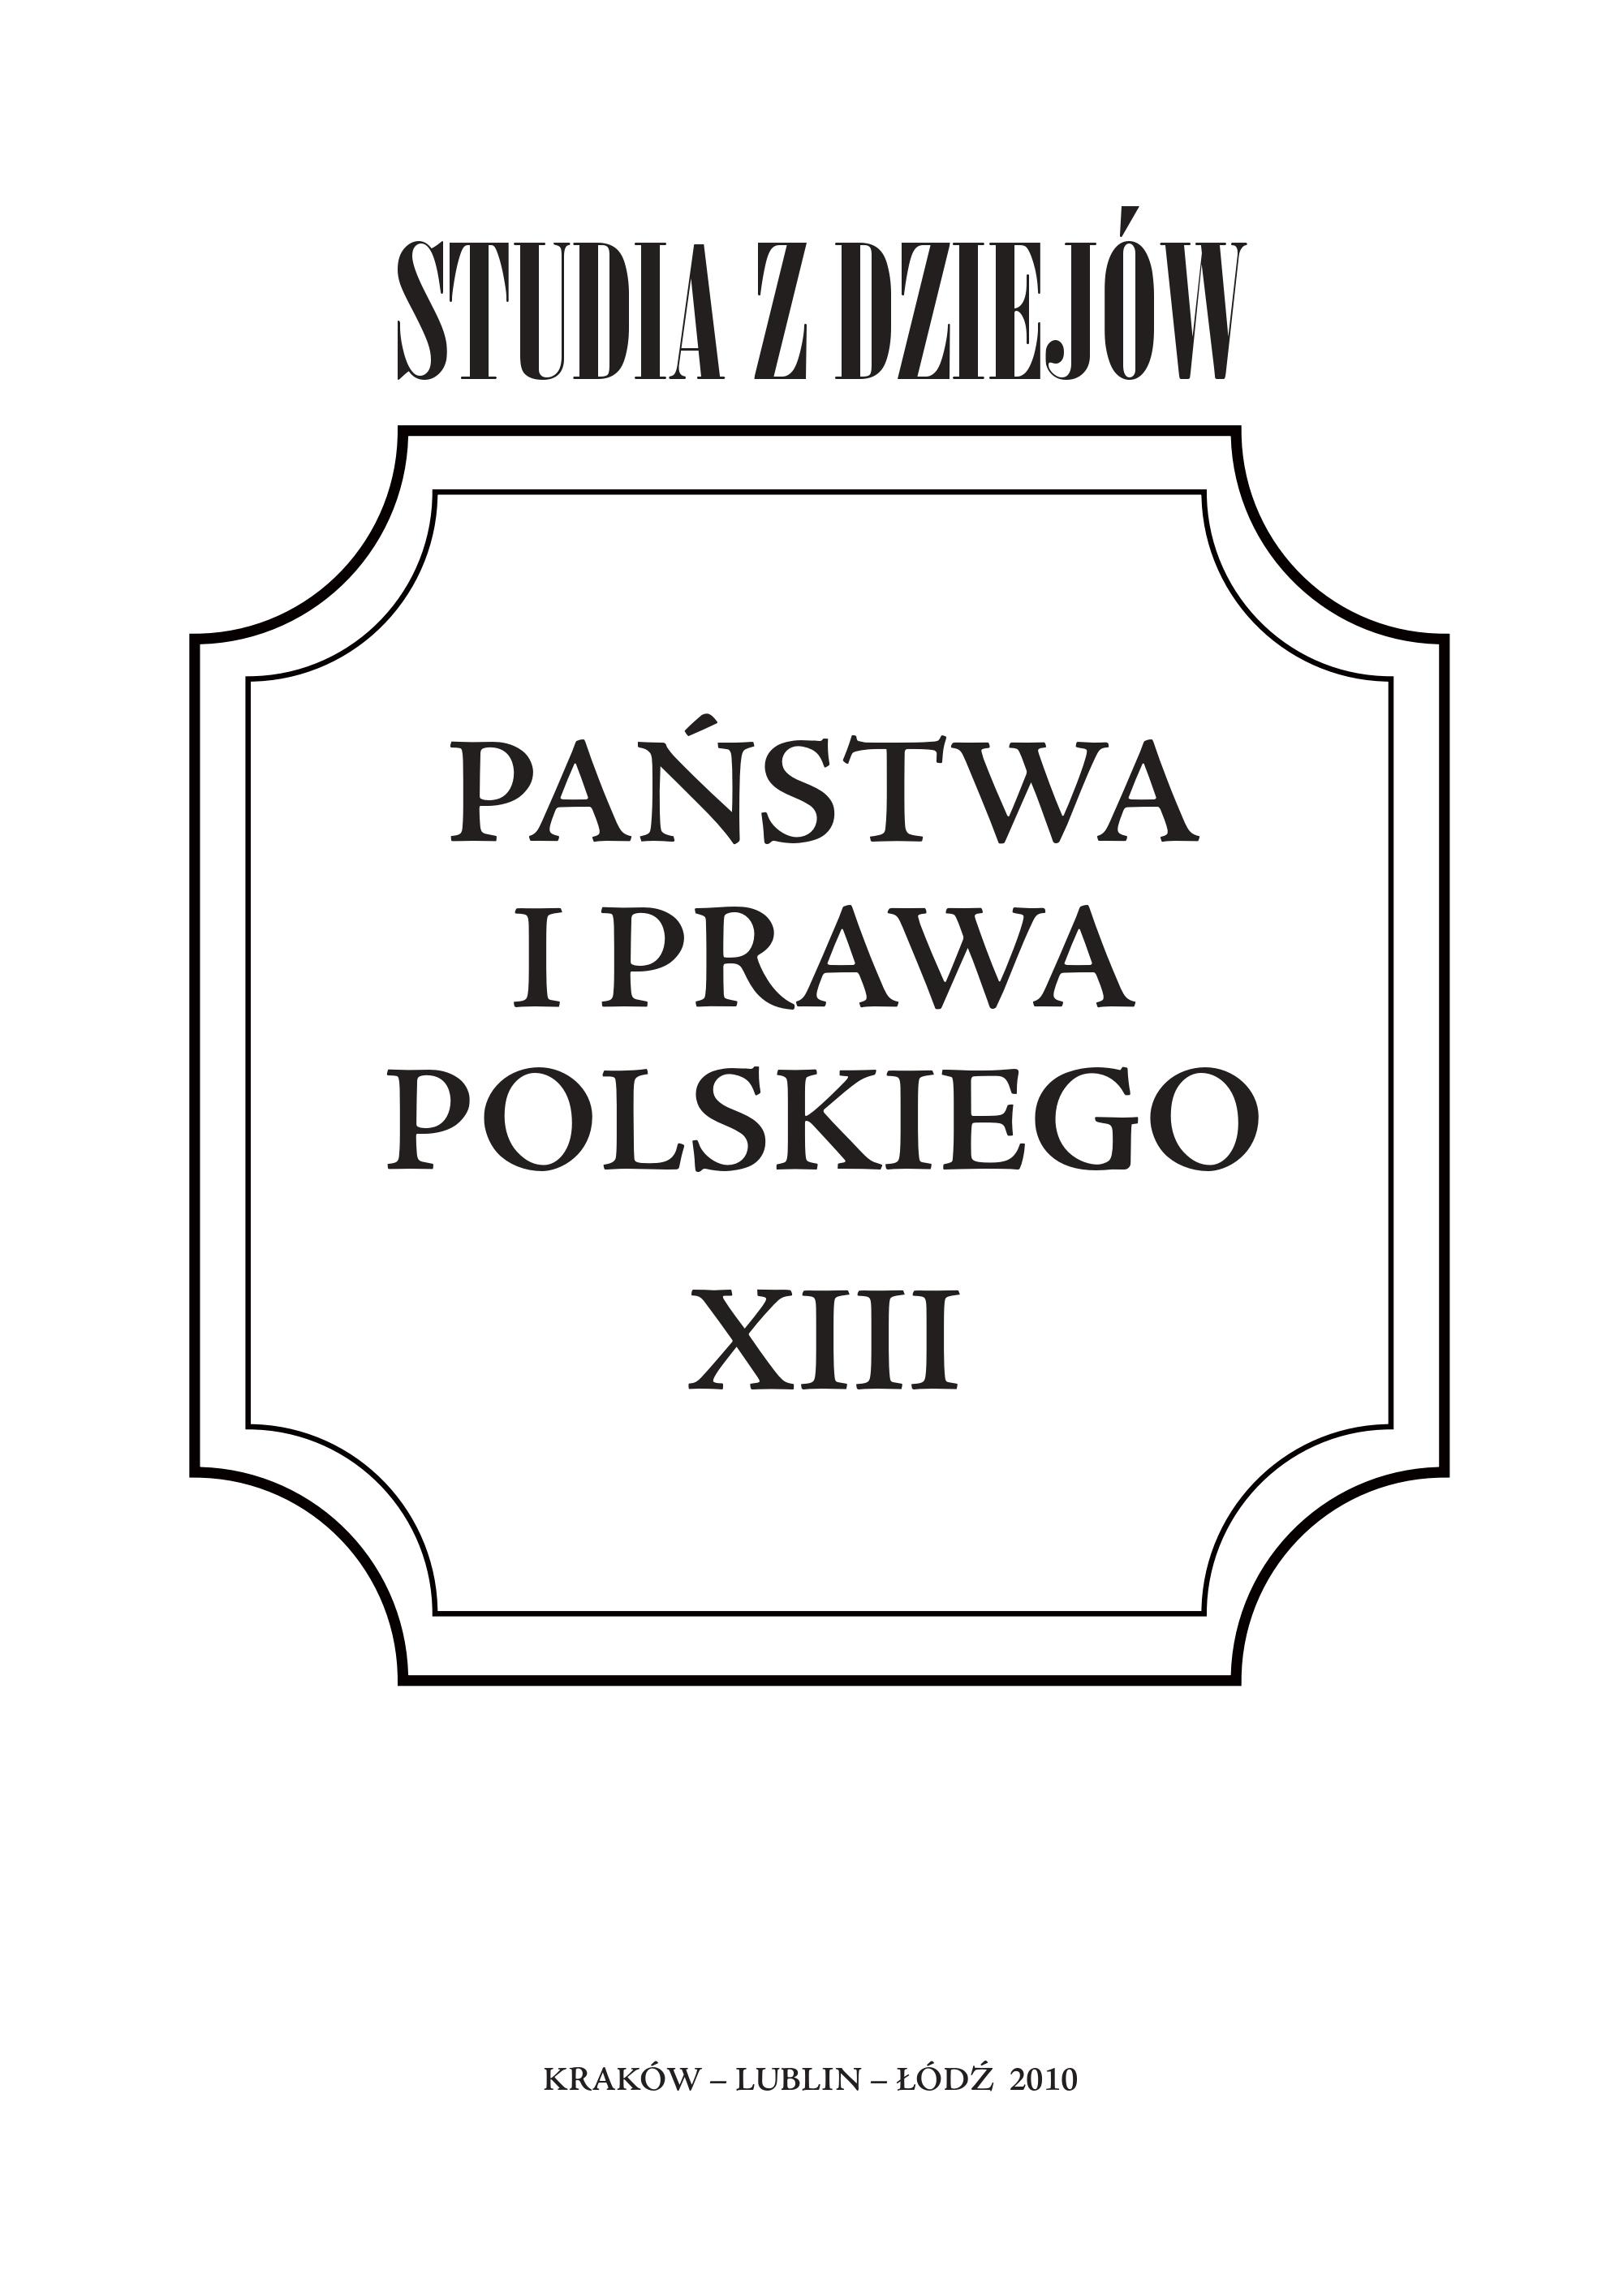 At the same time, Poland will become a self-government. Issues of genesis, legal basis, functioning and attempts to reform the voivodship self-government in the Second Republic of Poland, with particular reference to Pomerania and Wielkopolska Cover Image